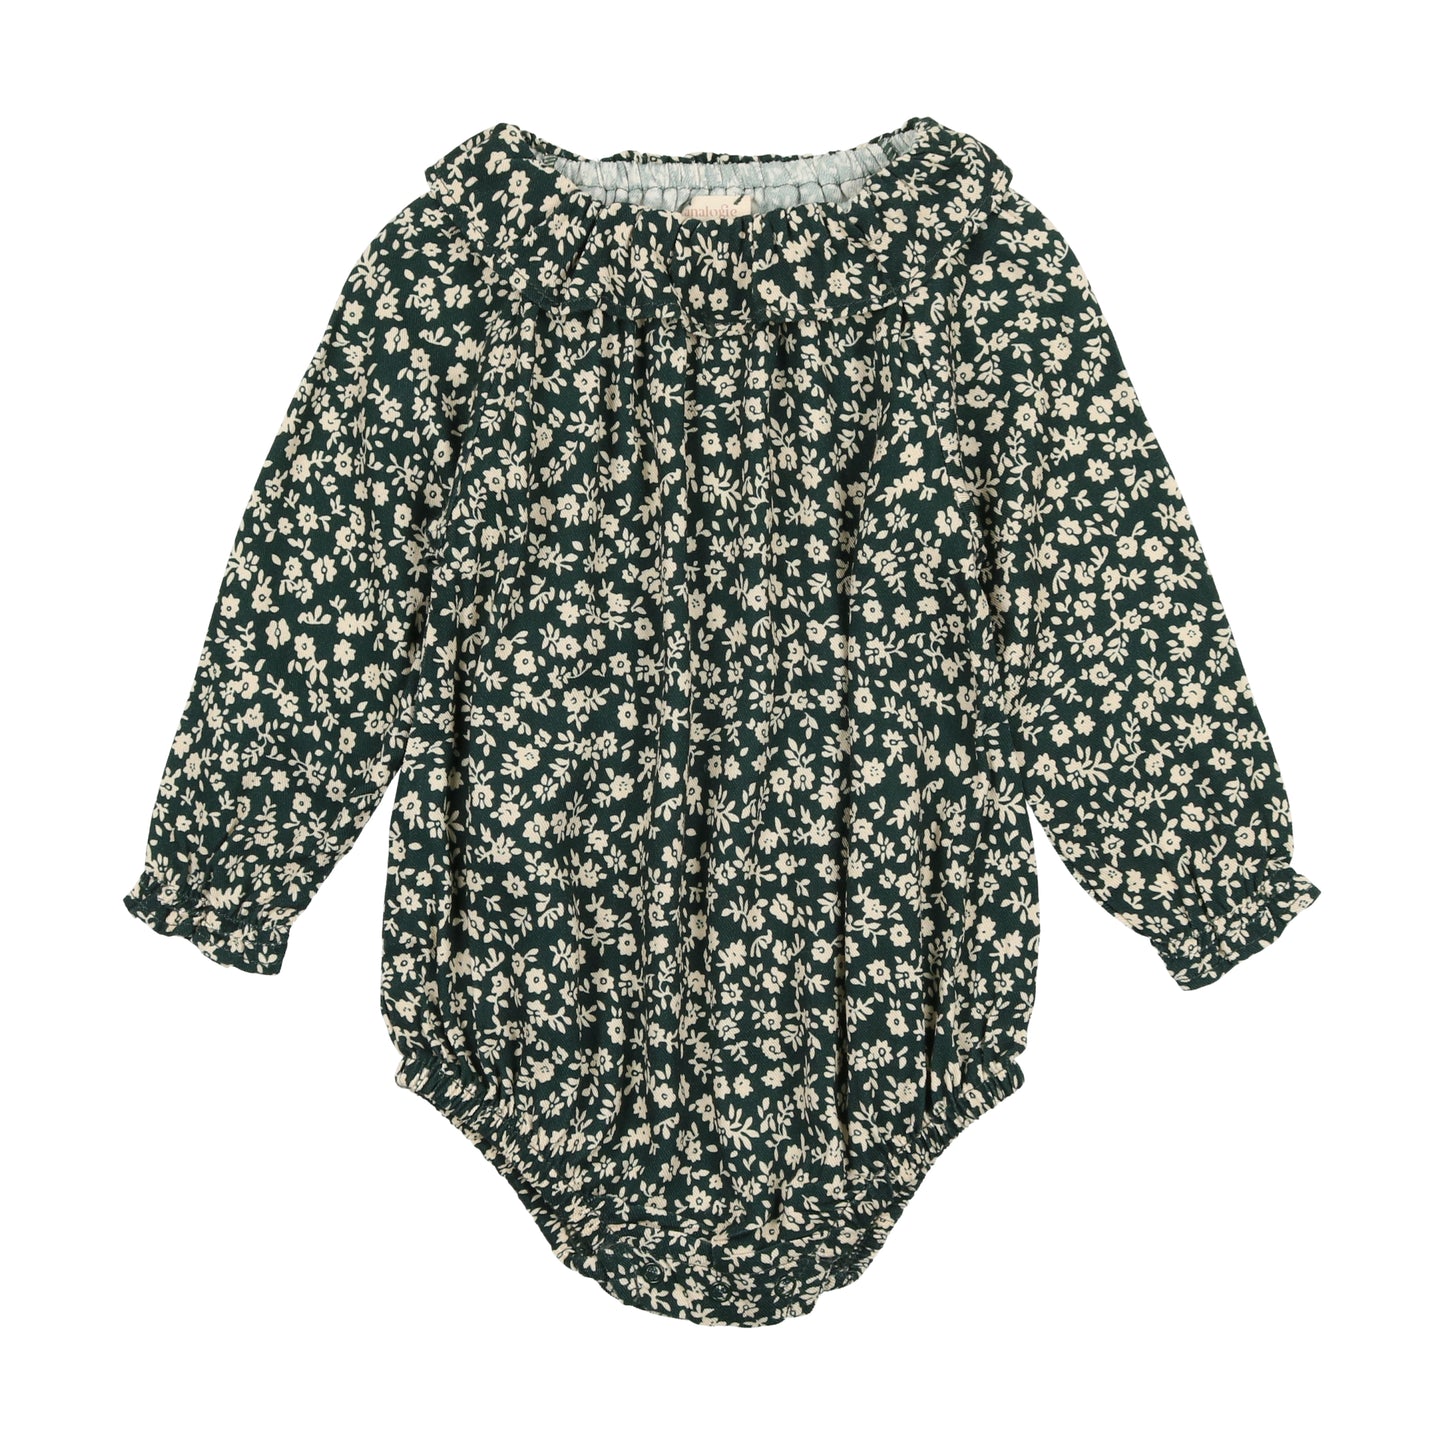 ANALOGIE FOREST FLORAL BUBBLE ROMPER